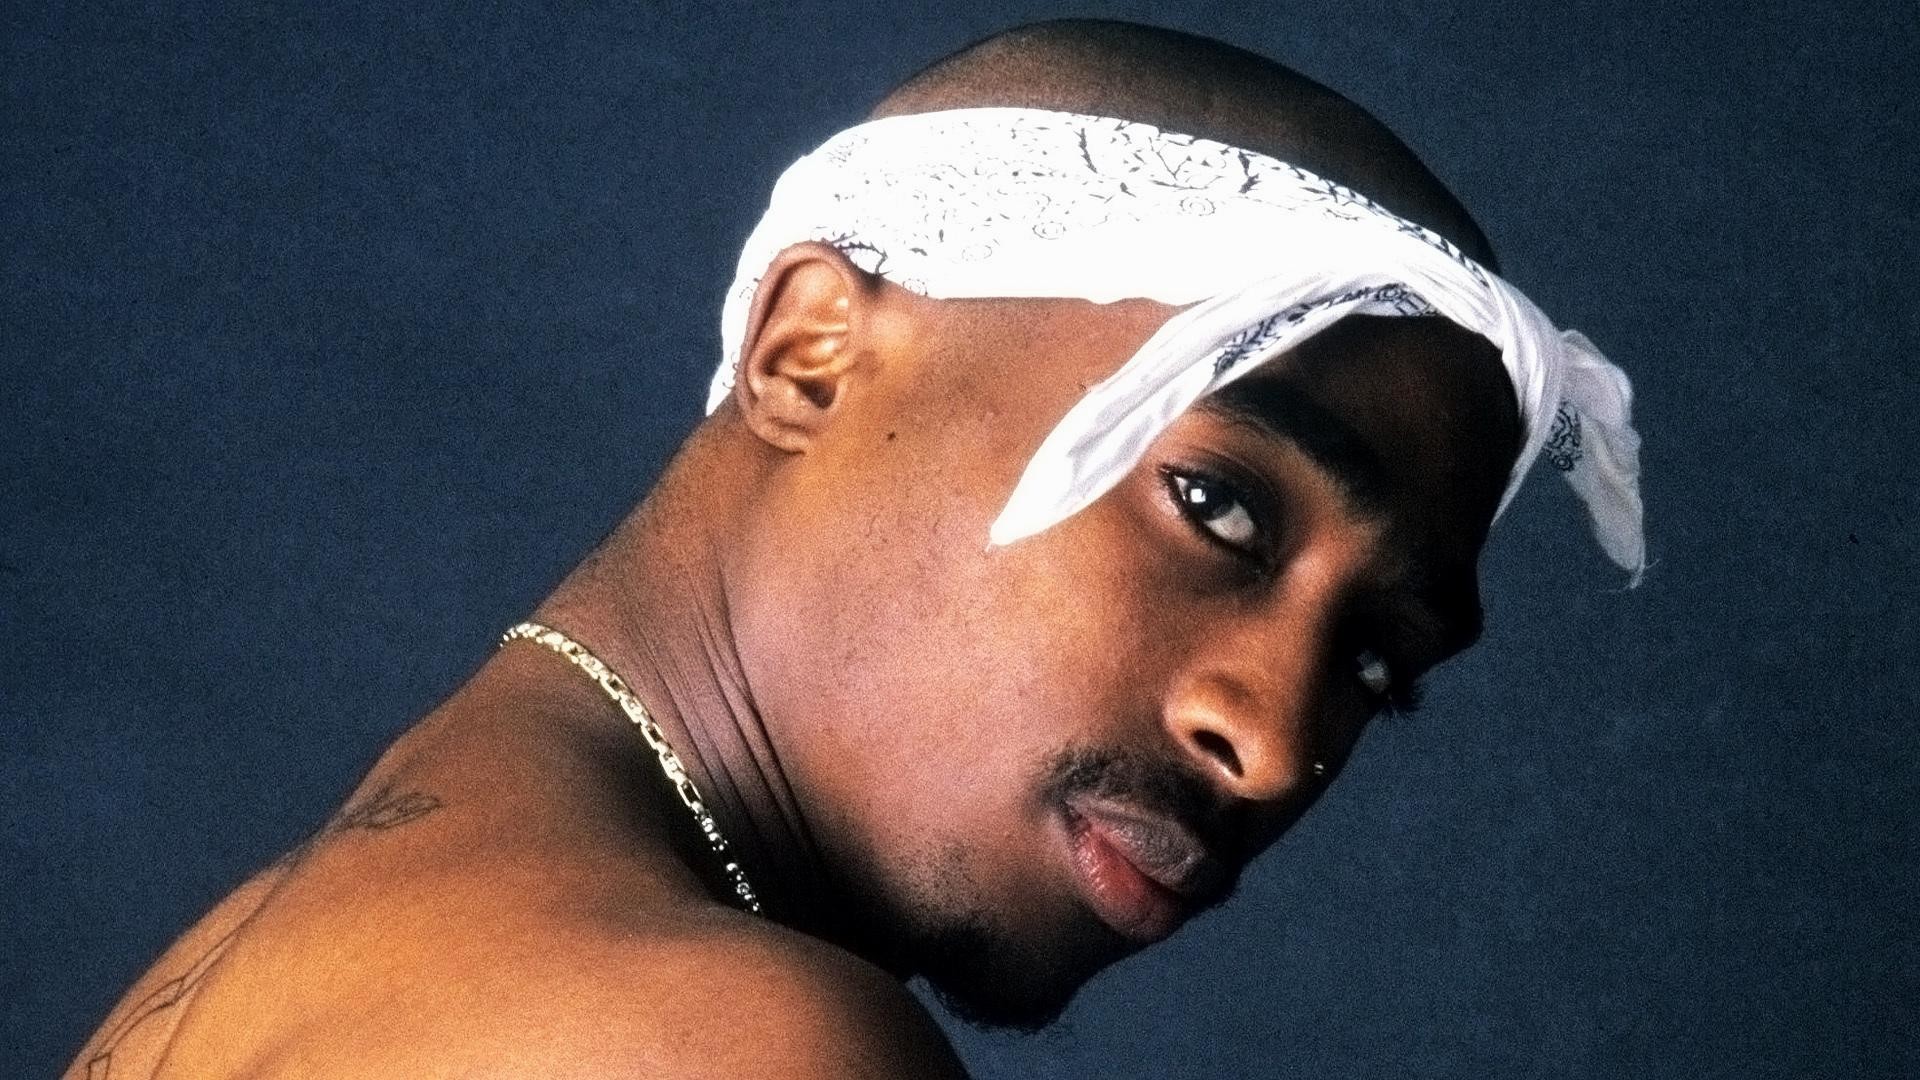 Tupac Wallpapers HD bolothebeast music 2pac